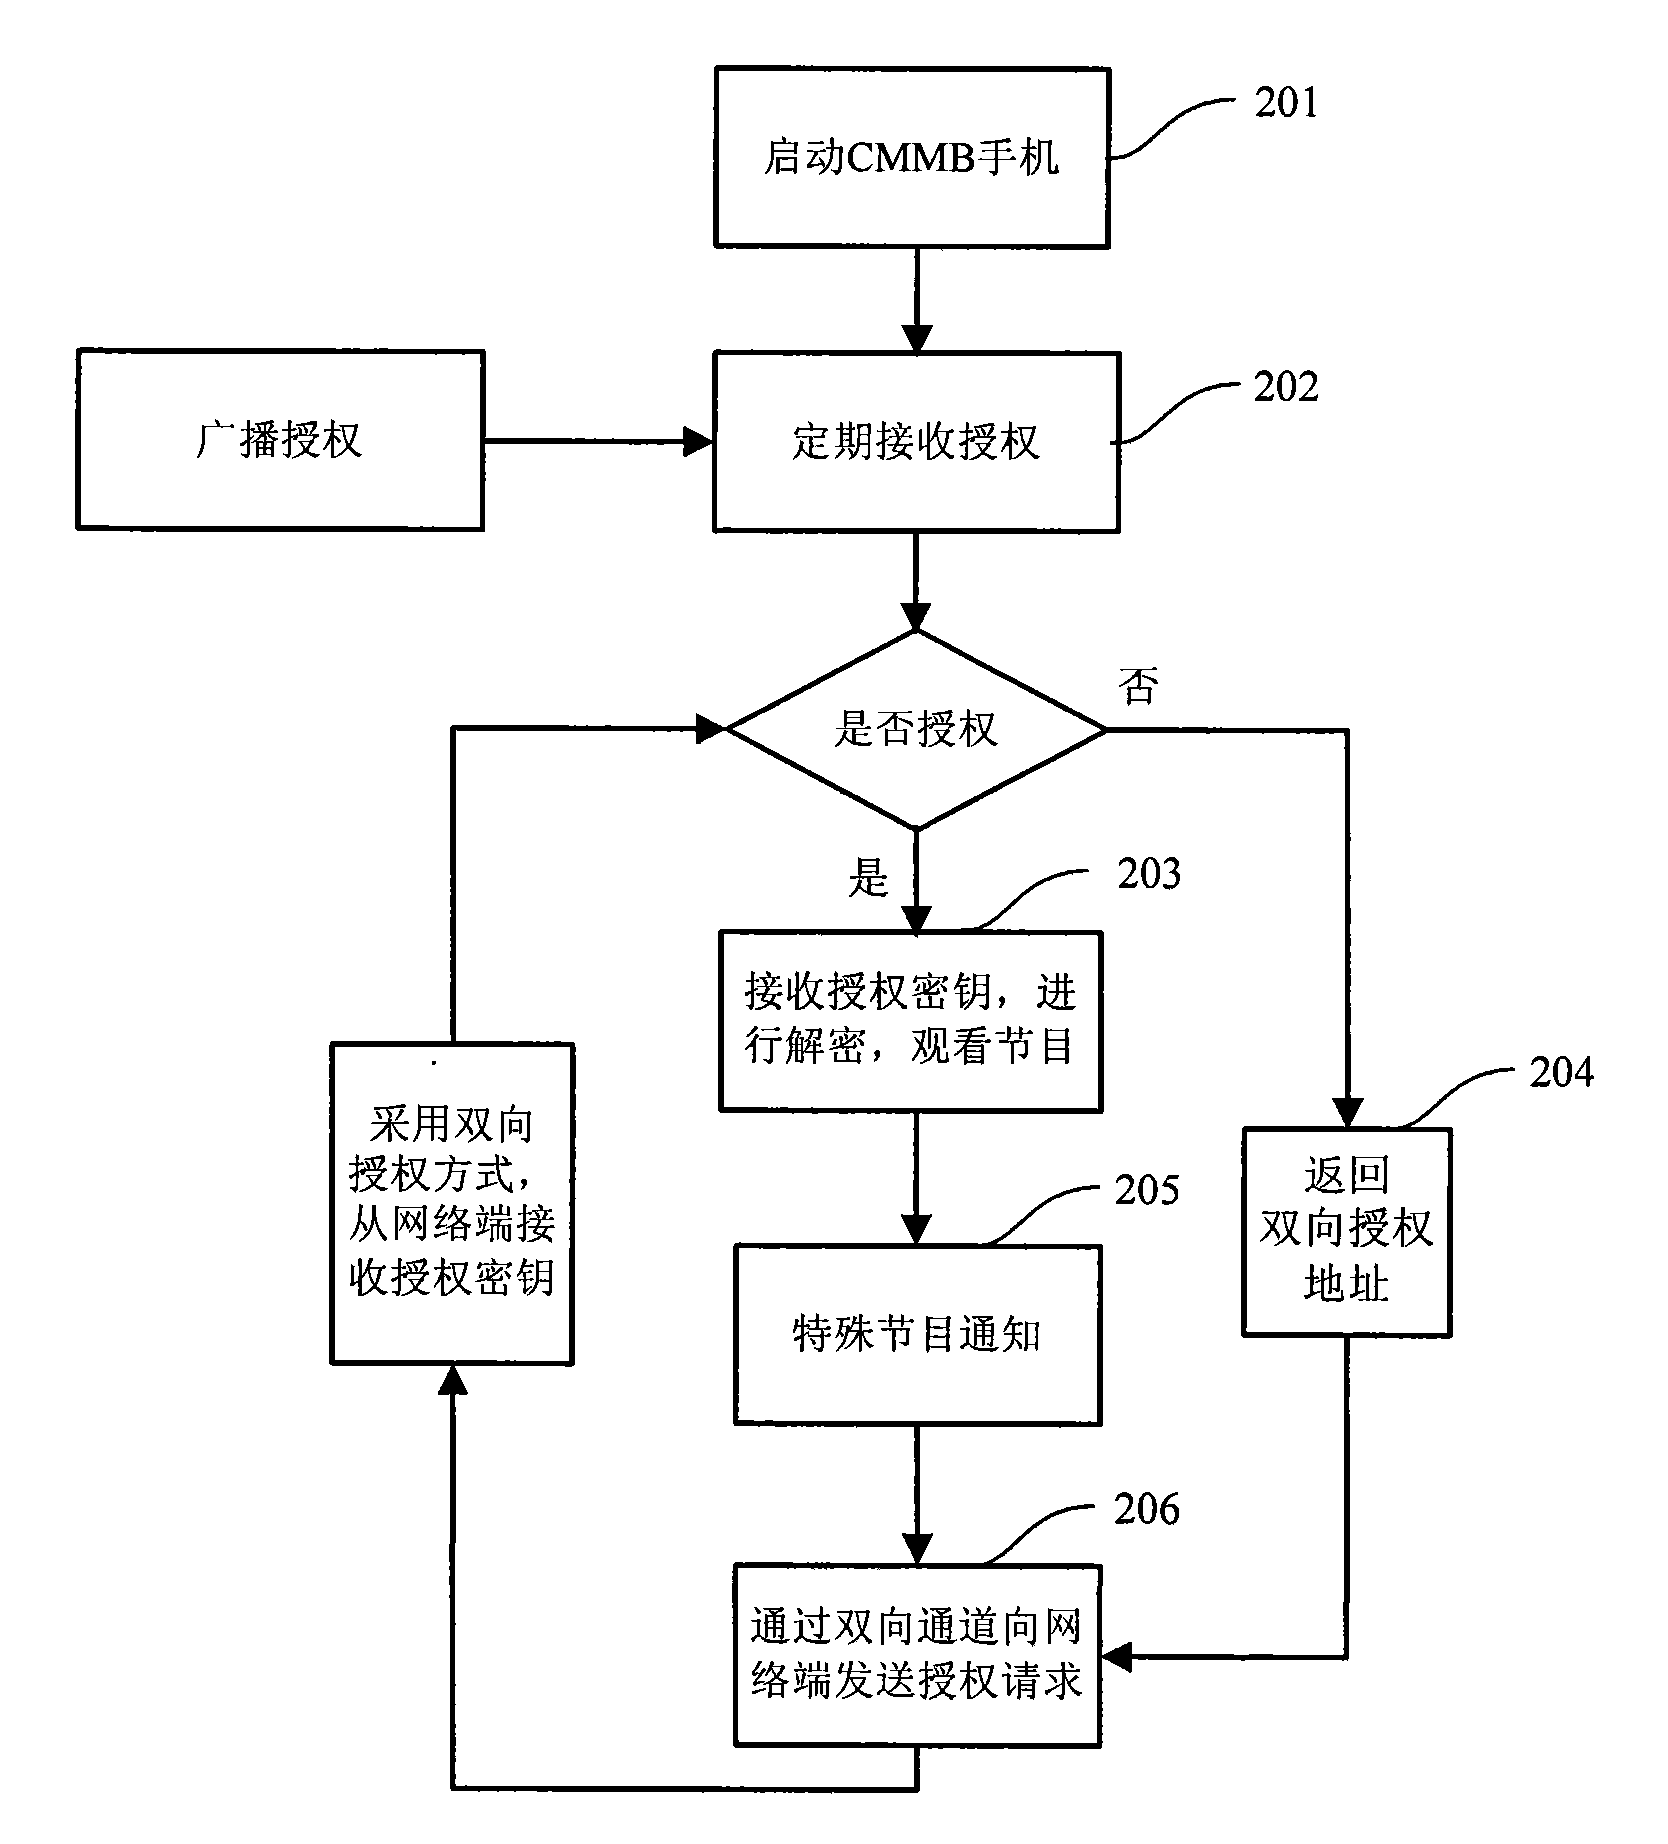 Method and system for acquiring service key, conditional access module and subscriber terminal